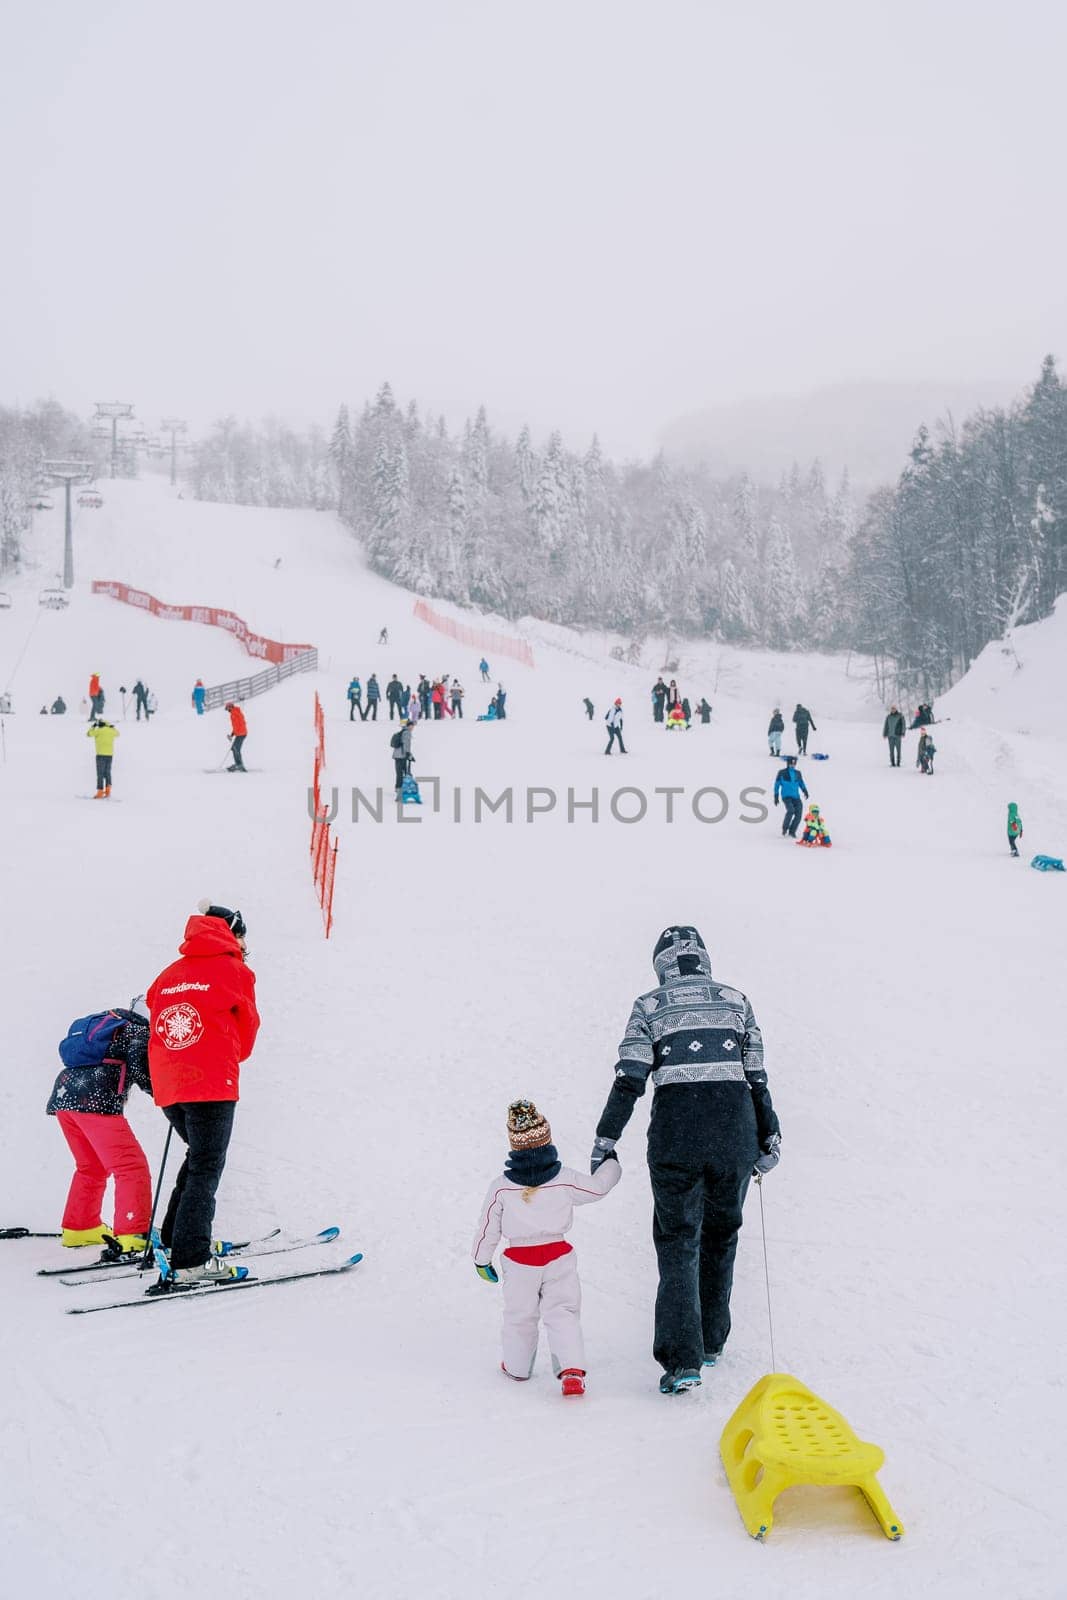 Mothers with children on skis and sleds climb a snow-covered ski slope along the red fence. Back view by Nadtochiy